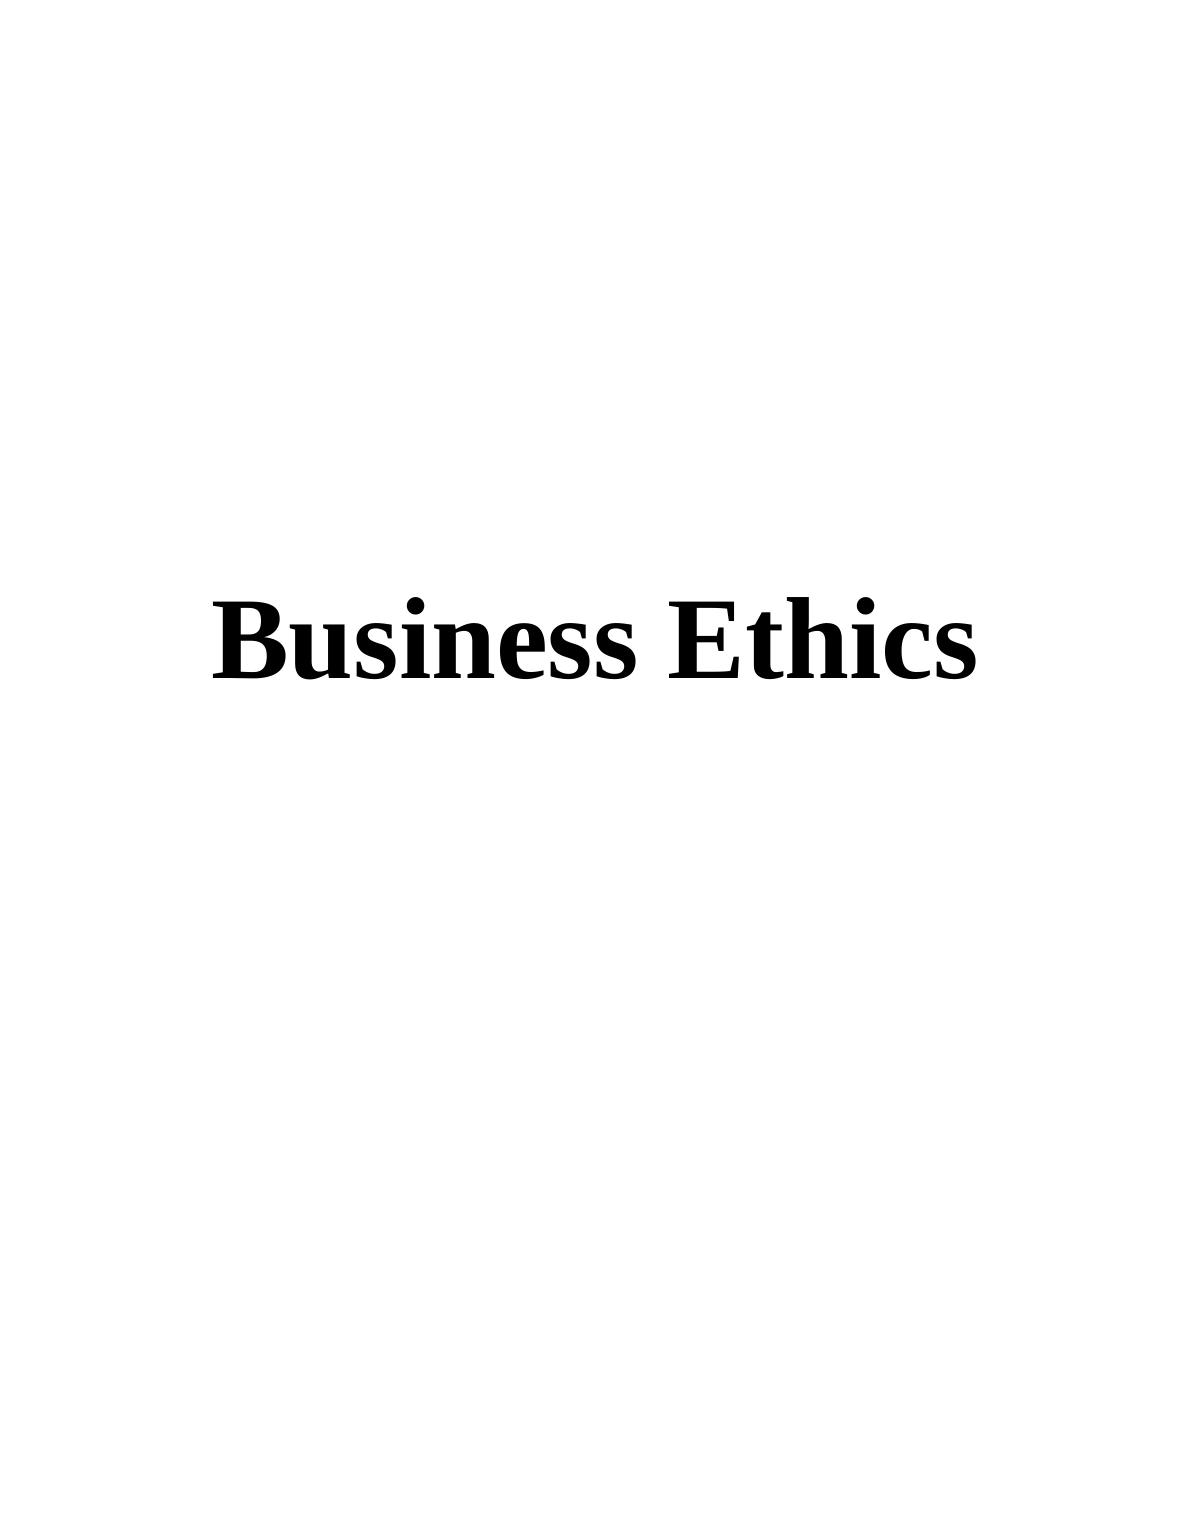 Business Ethics of NIKE : Report_1